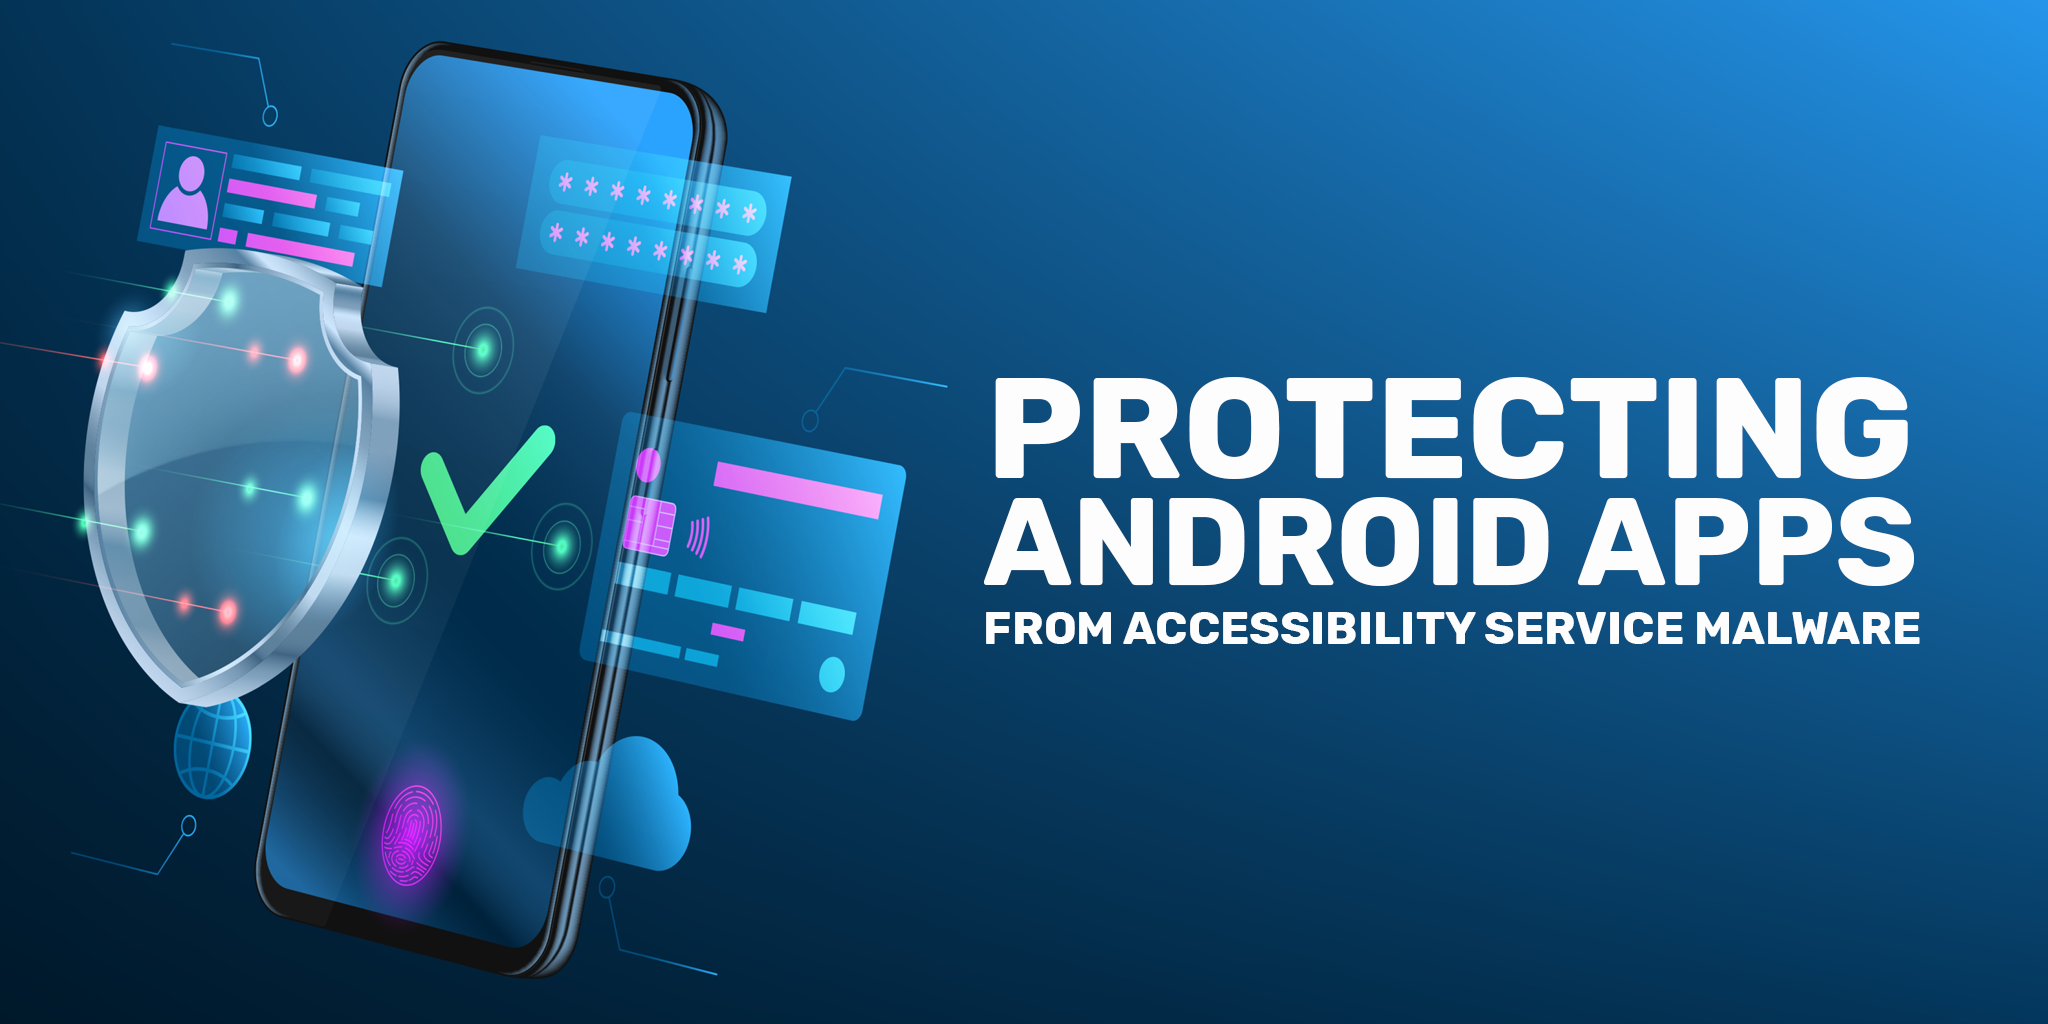 Protecting Android Apps from Accessibility Service Malware